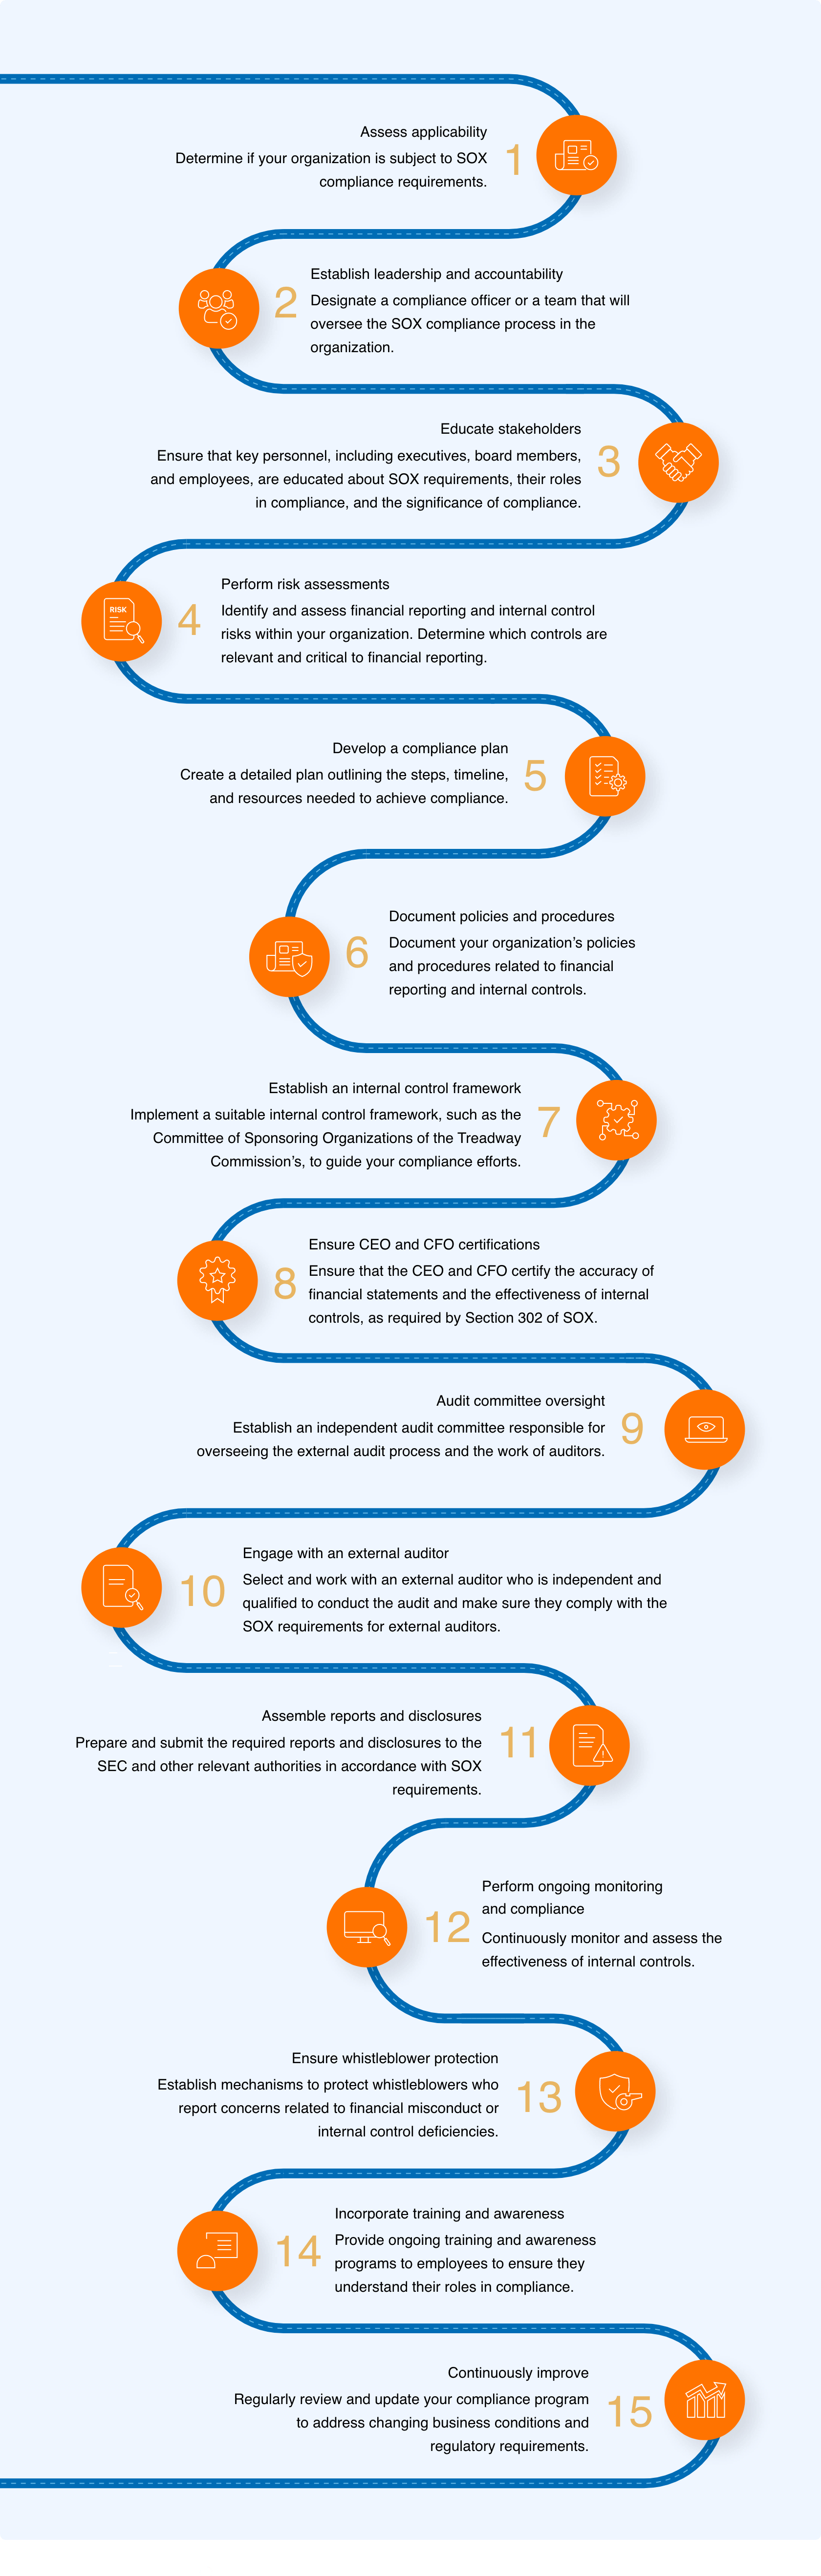 Roadmap to achieve SOX compliance